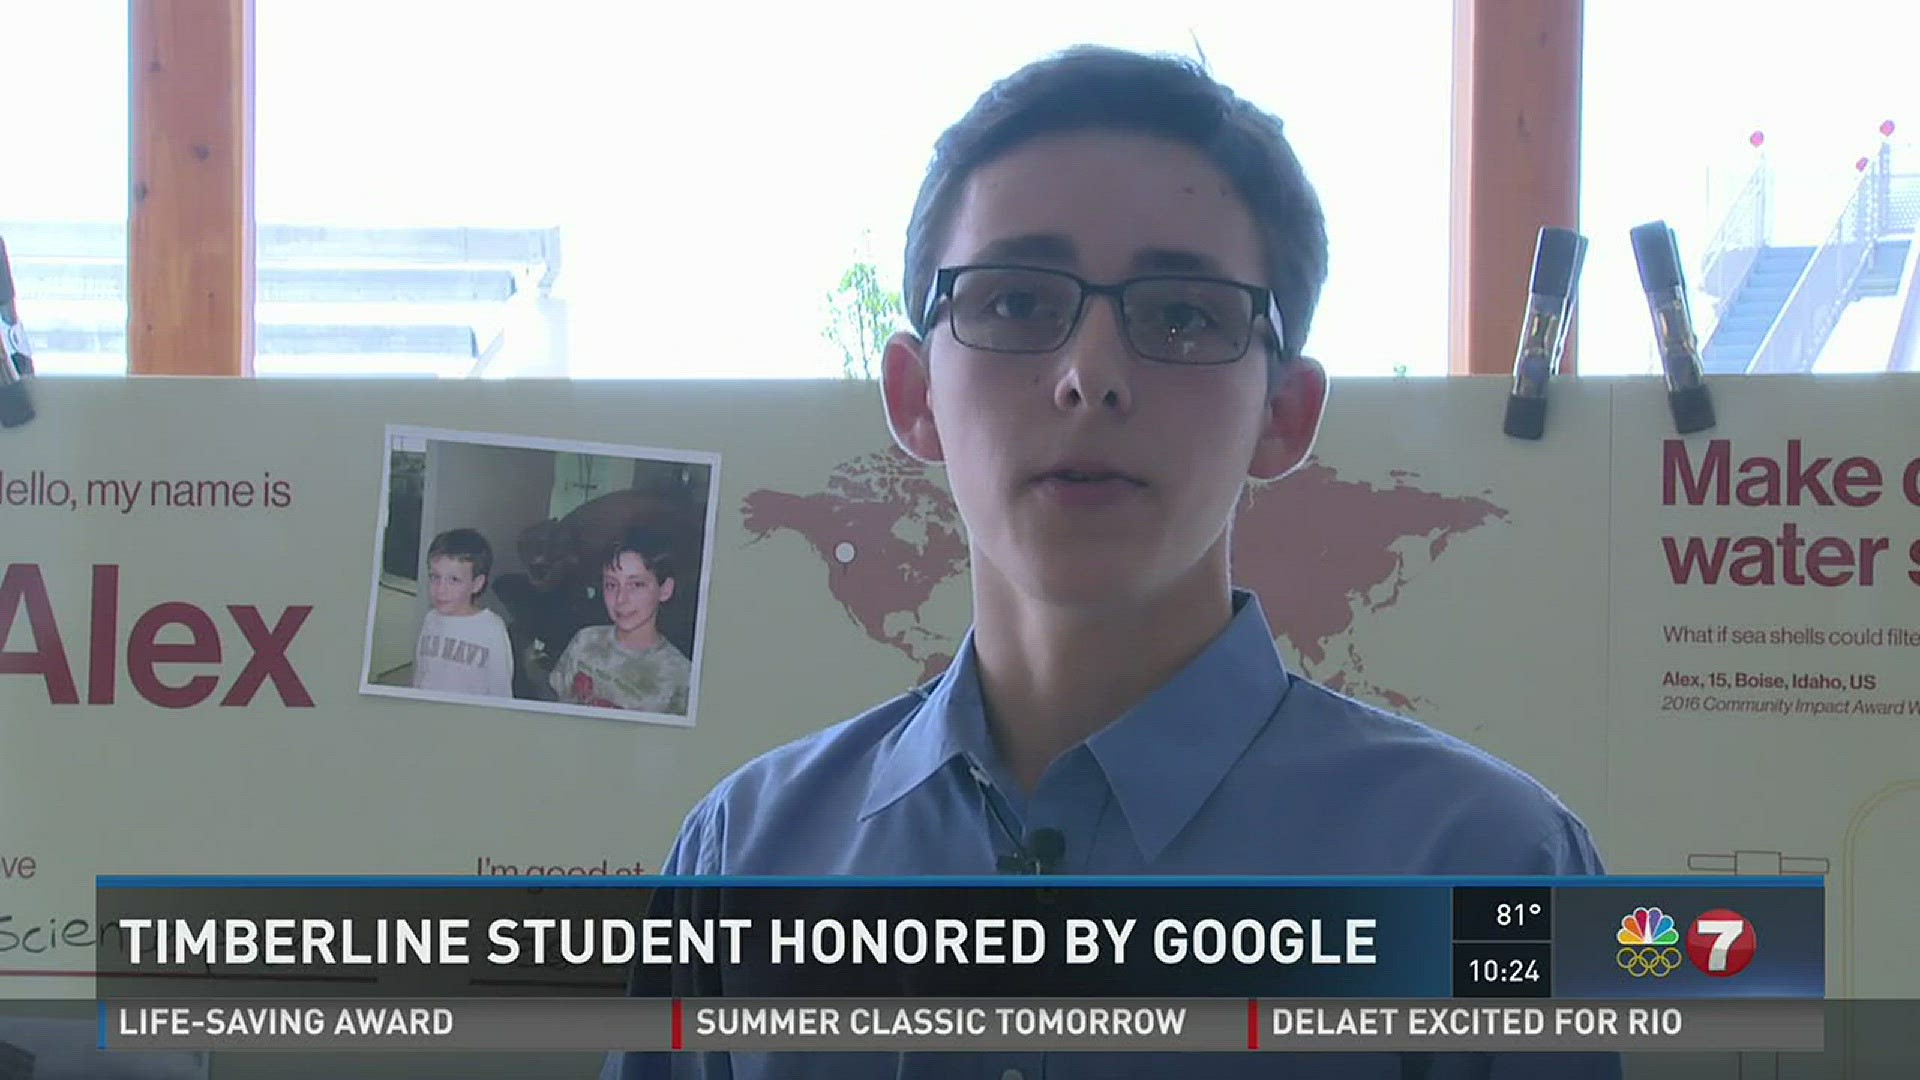 Timberline student honored by Google